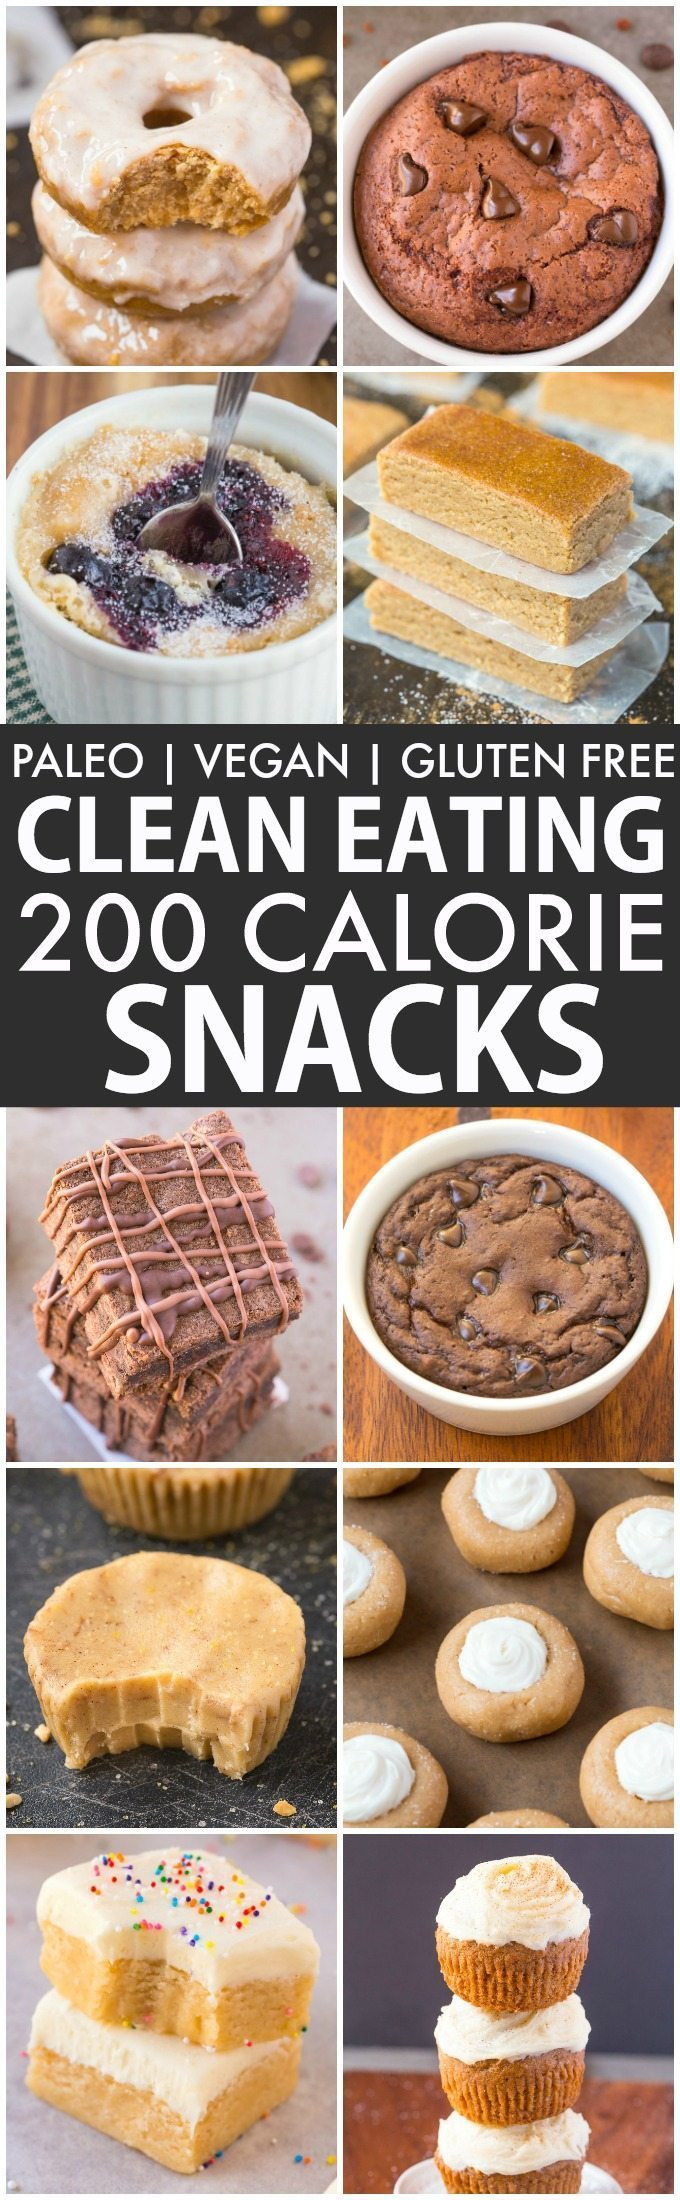 Healthy Filling Snacks
 15 Healthy Desserts and Snacks Under 200 Calories